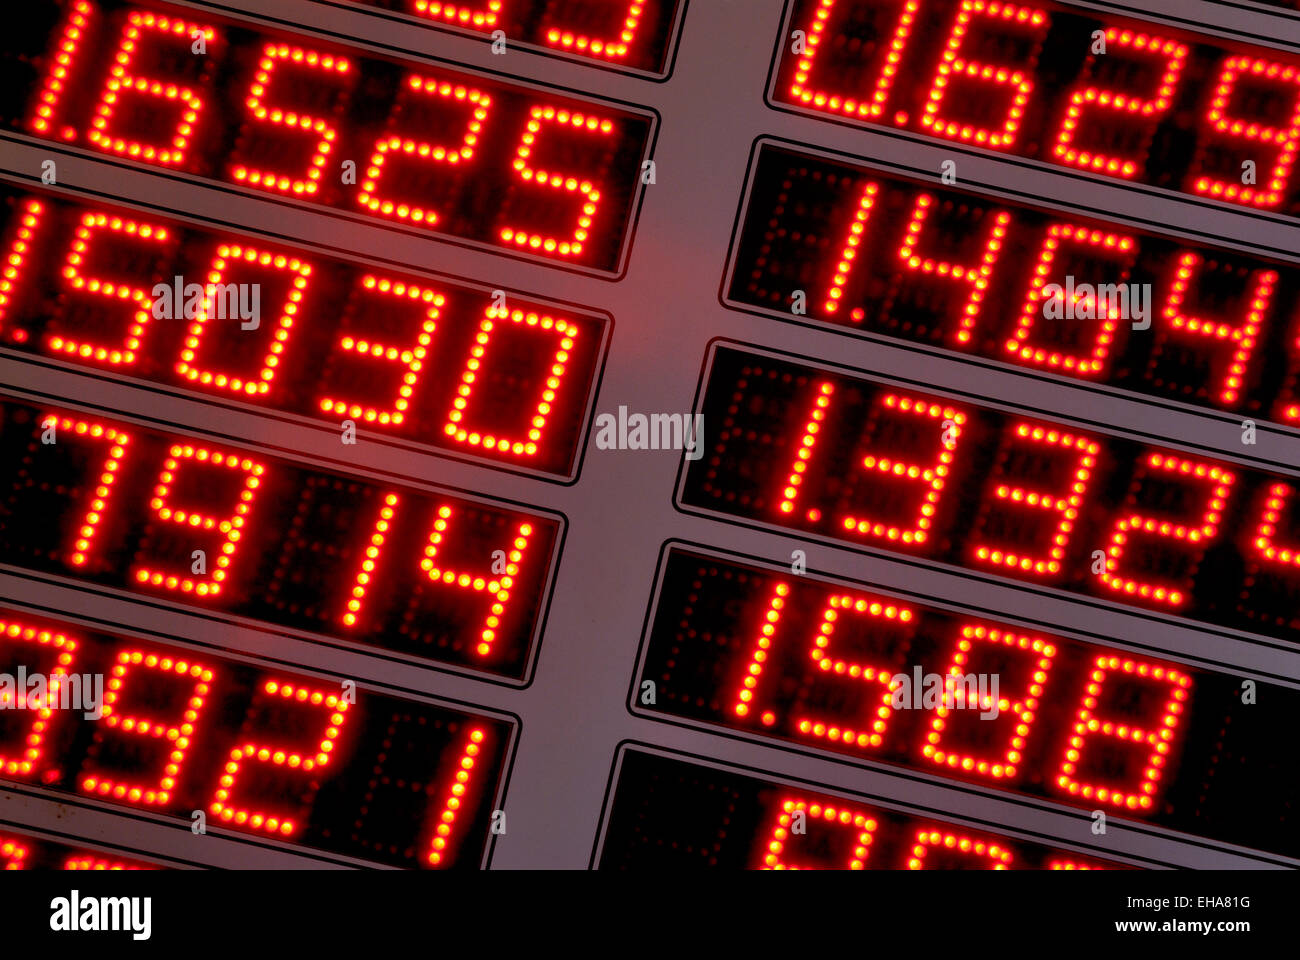 Display showing foreign currency exchange rates in a Money exchange office Stock Photo